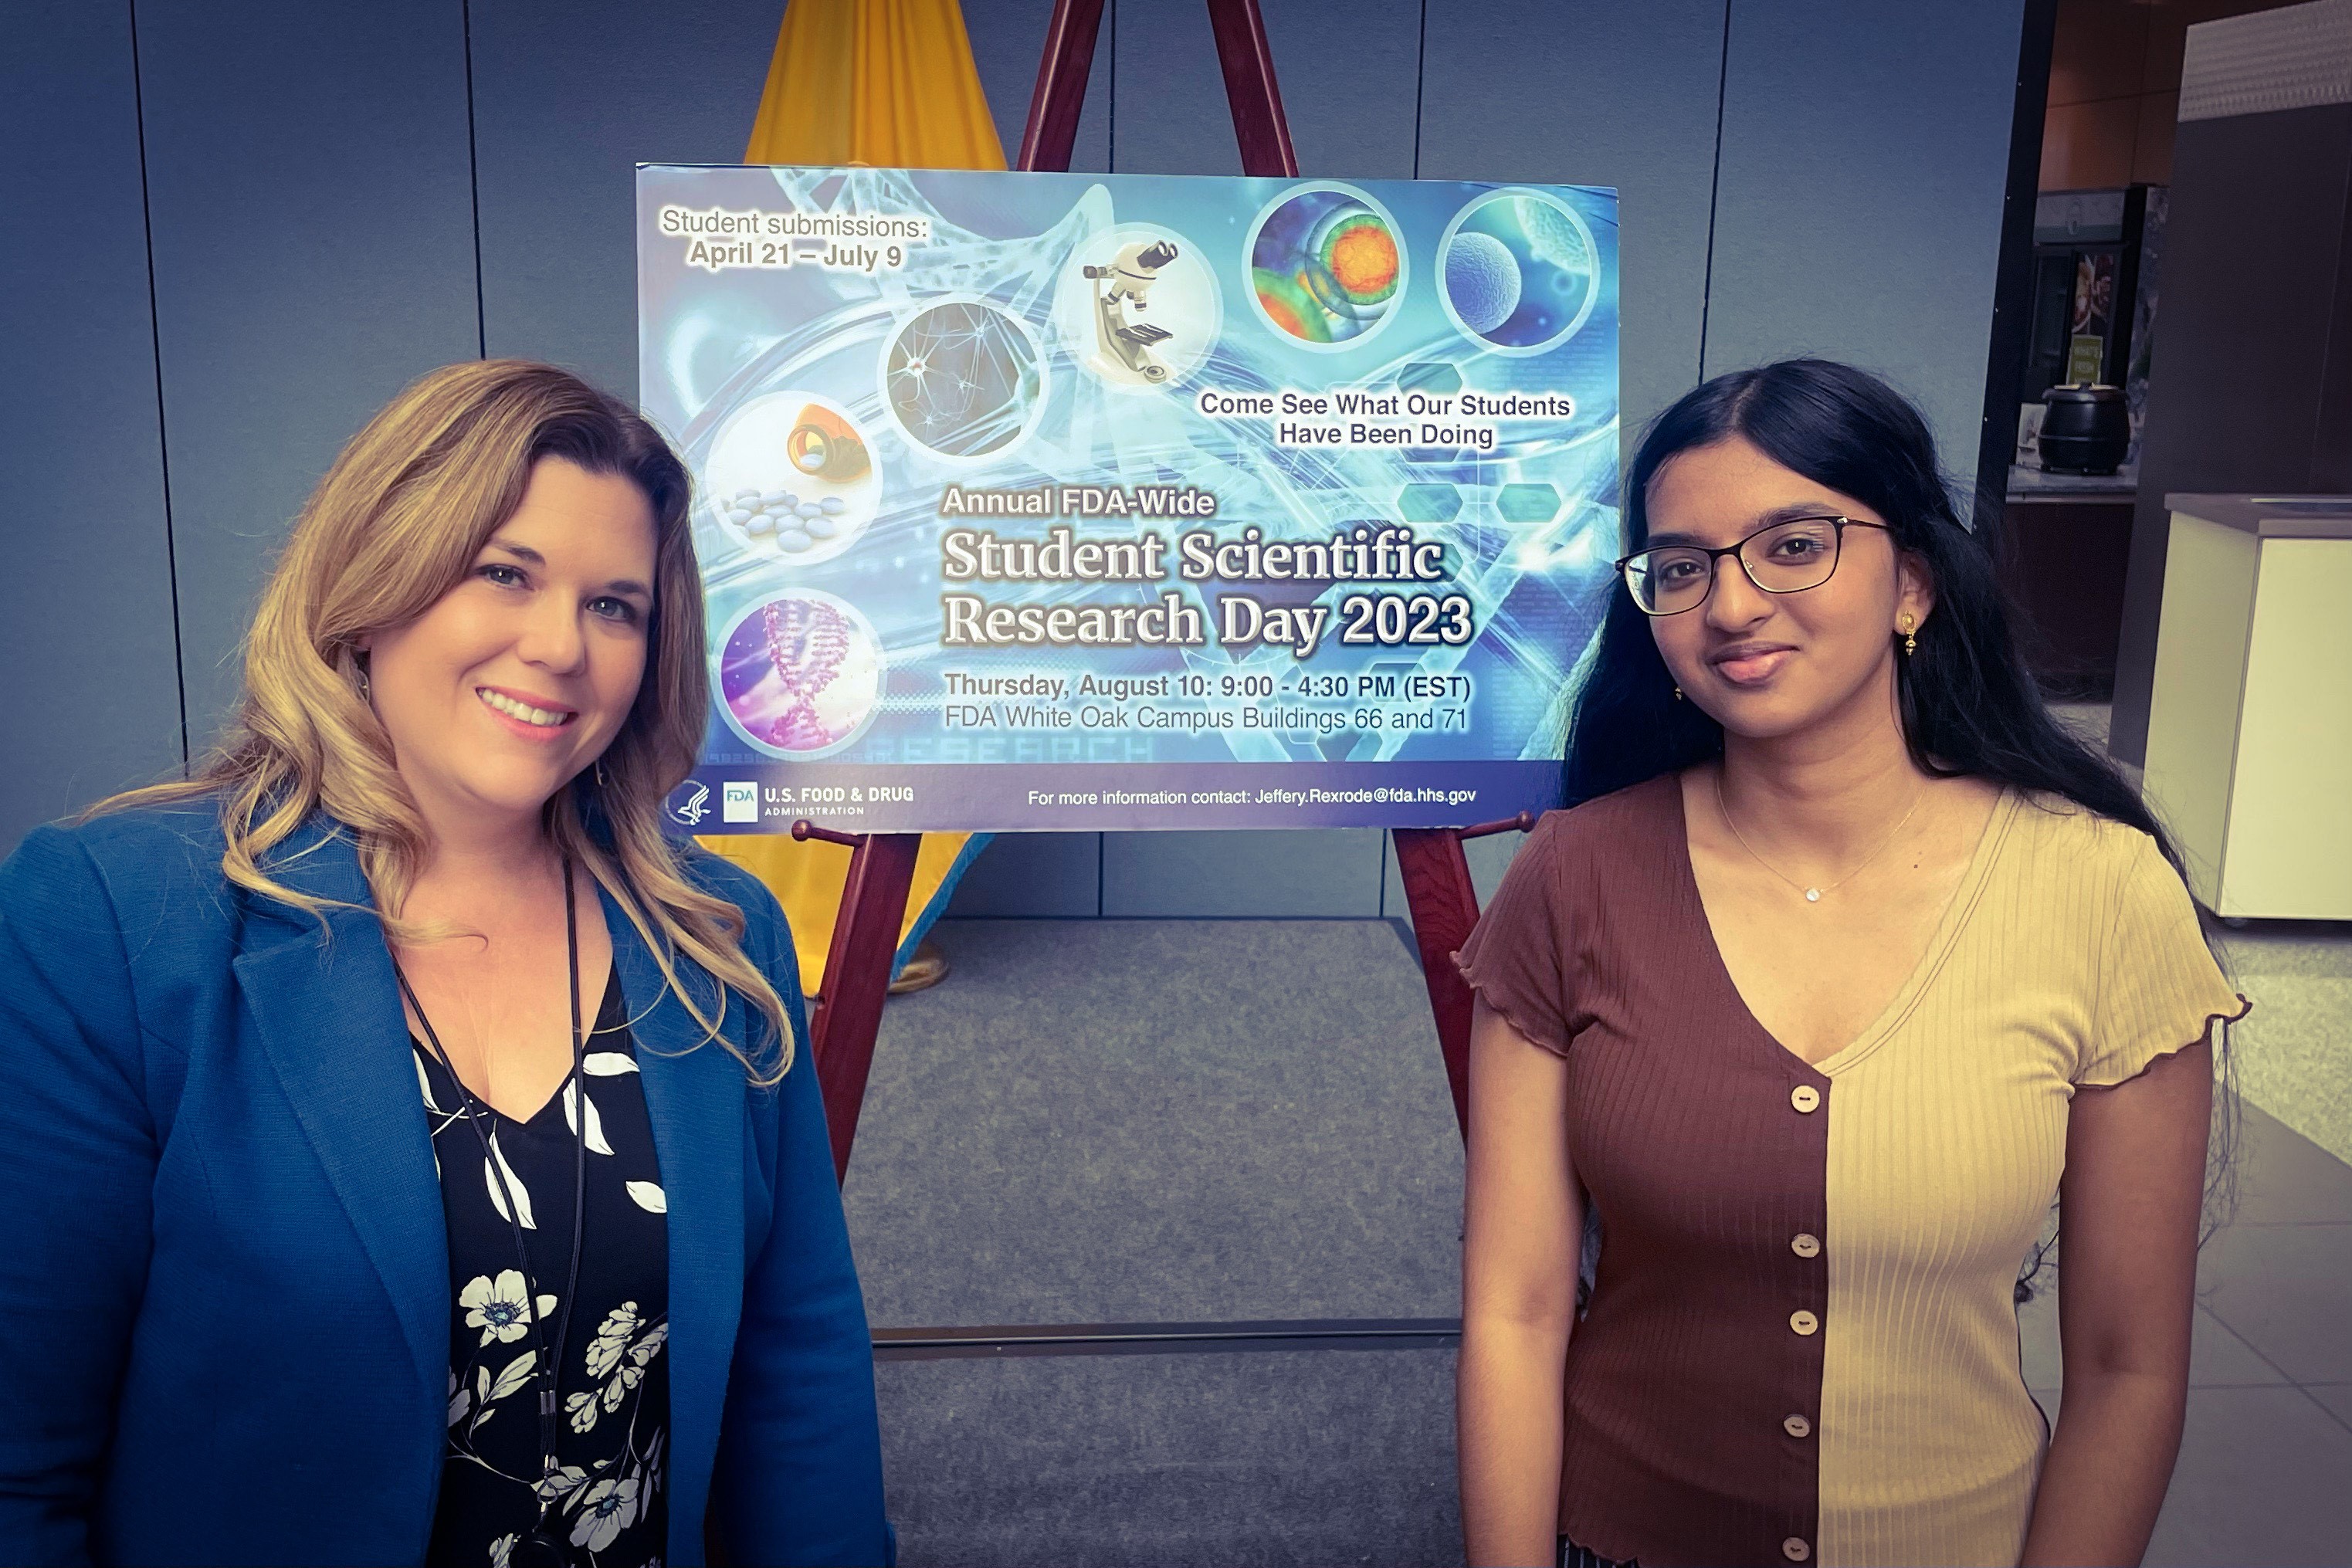 Risa Verma and her mentor Dr. Laura Markley in front of a poster for FDA Student Scientific Research Day 2023.